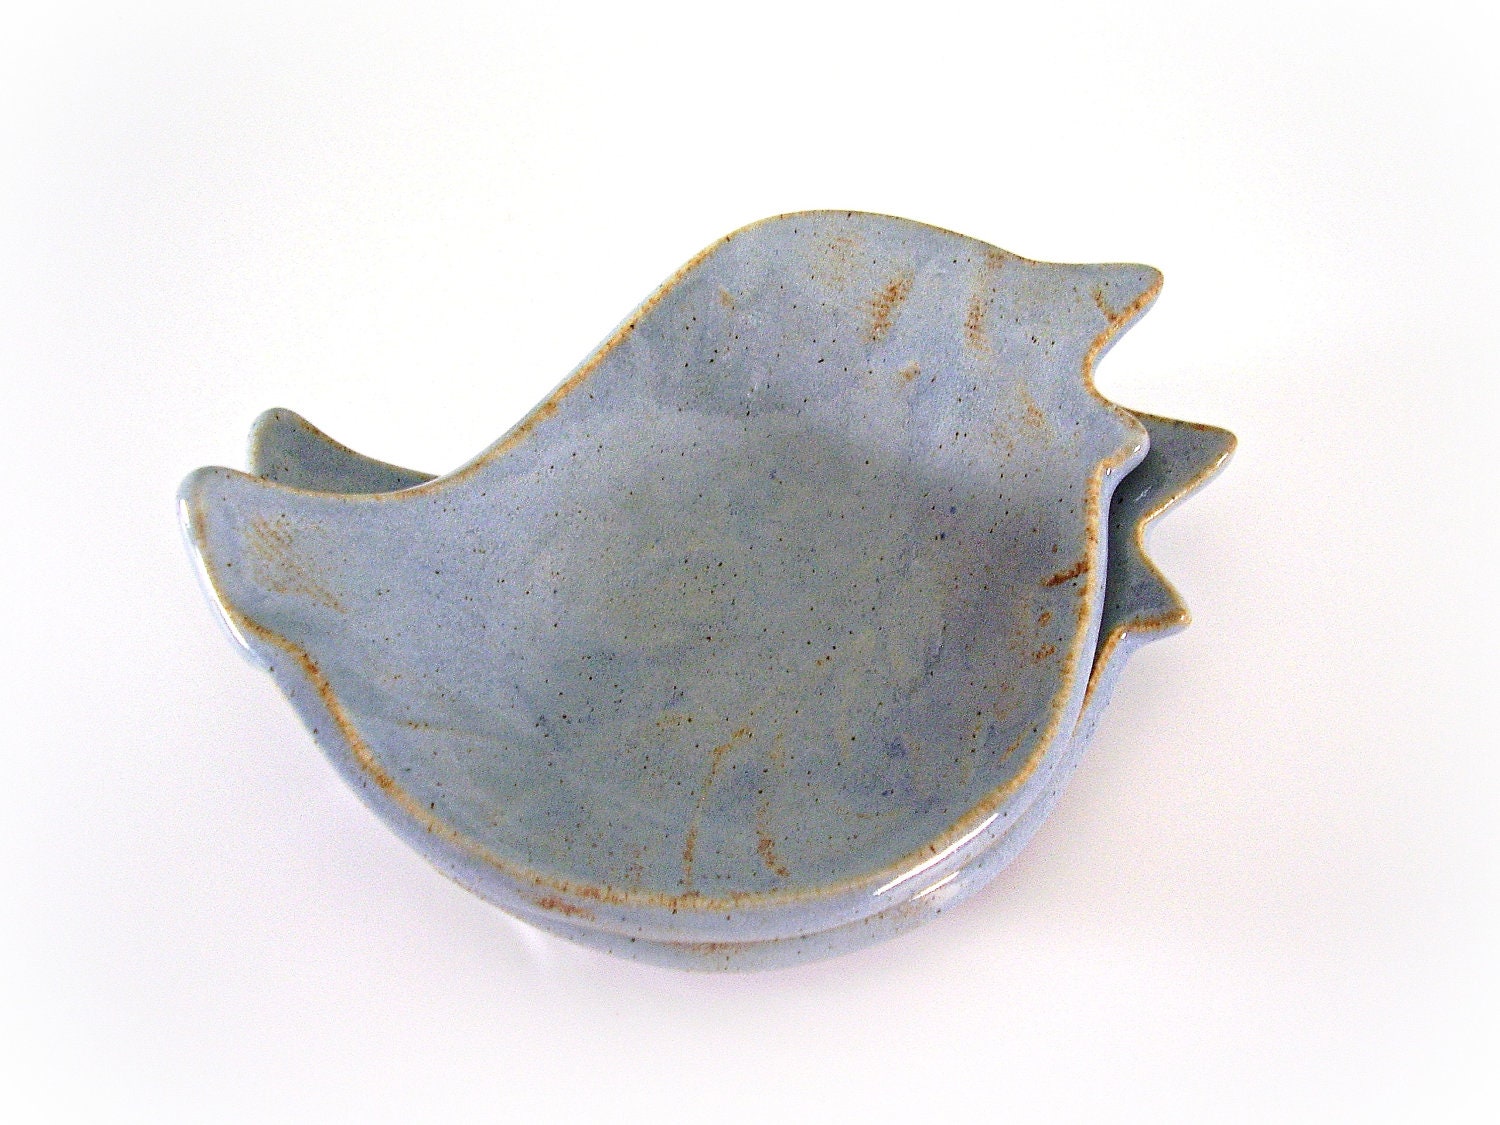 Ceramic Birdie Bowl - Country Blue - Rustic/Shabby Chic - Home Decor/Ring Bowl/Gift - Handmade Pottery - Ravenhillpottery